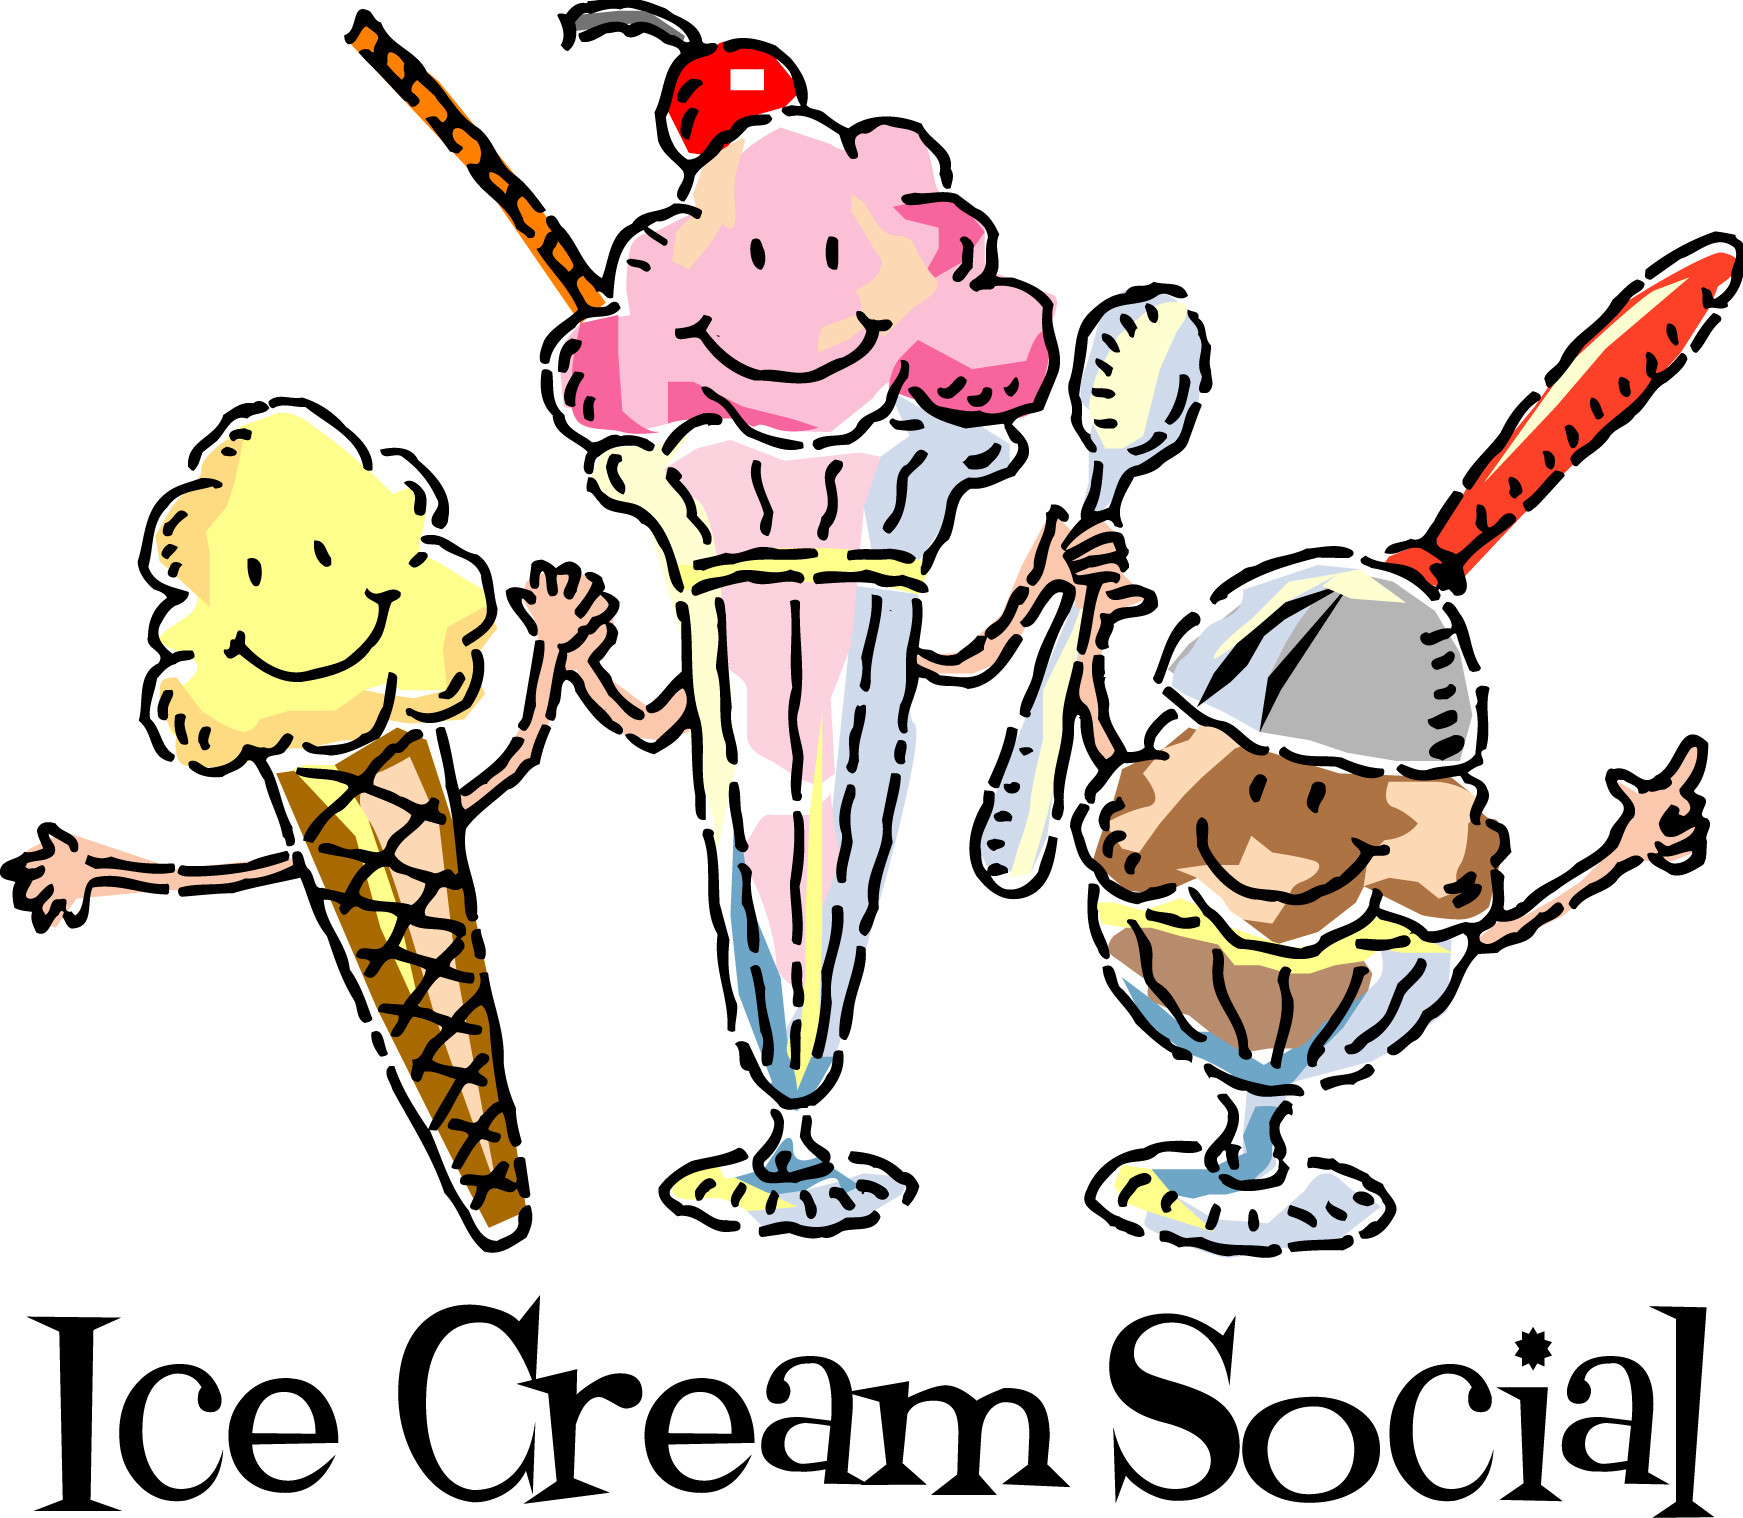 Attend the ice cream social today!